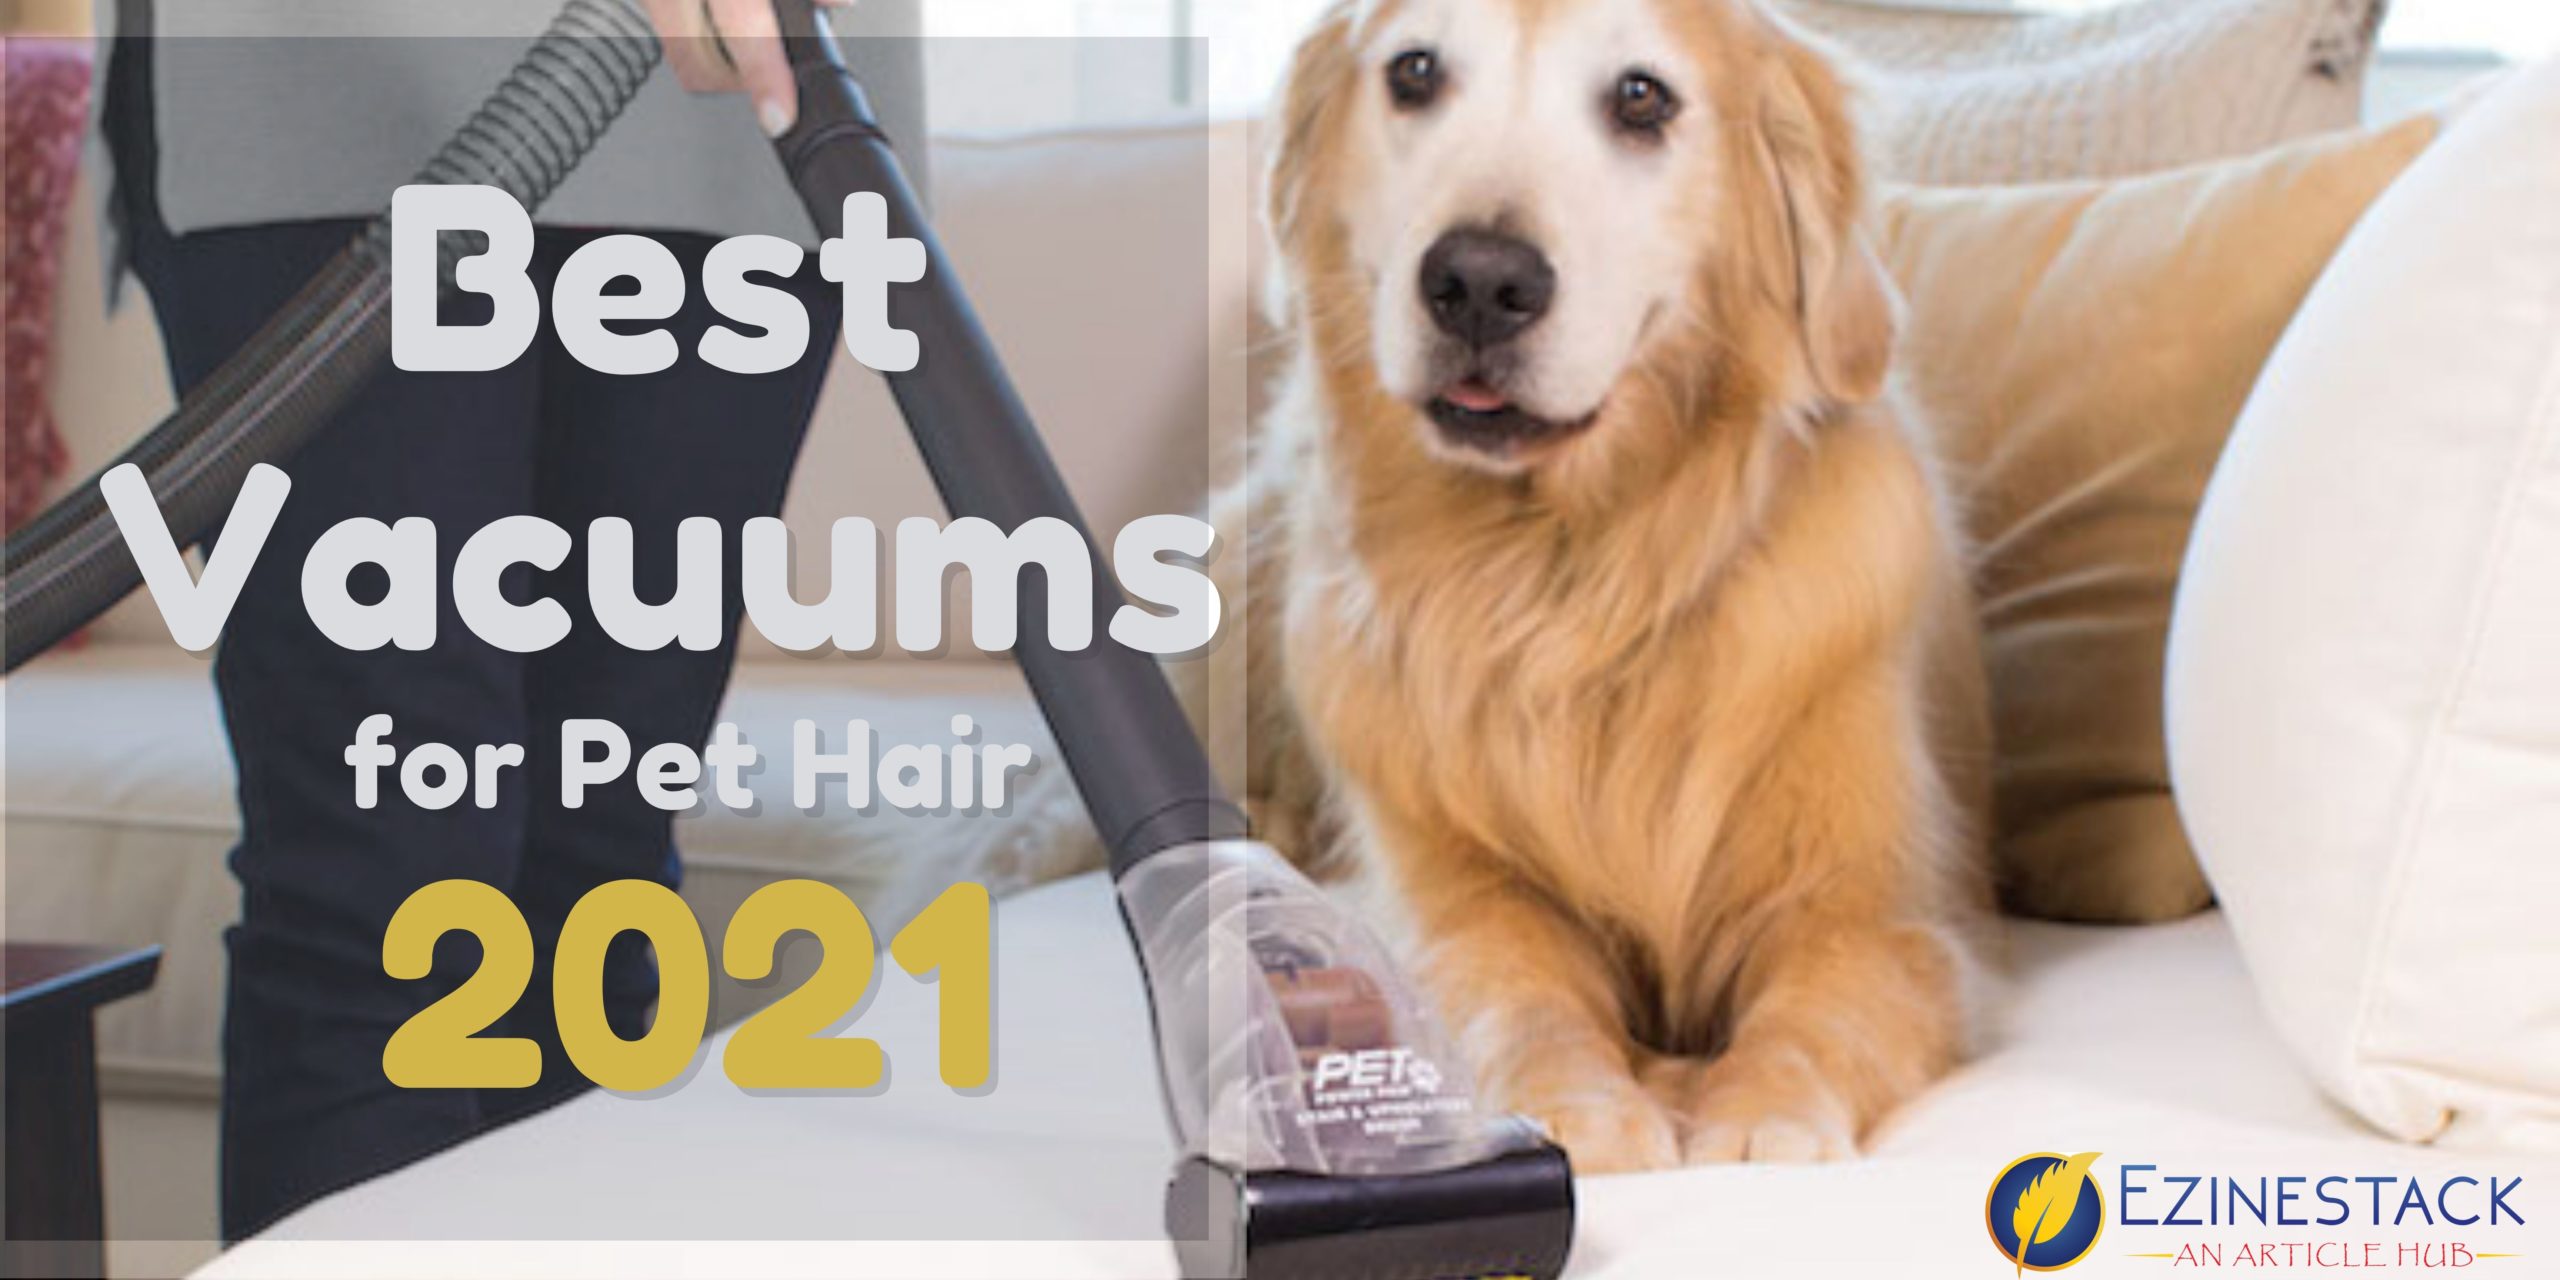 What Are The Best Vacuums For Pet Hair 2021?